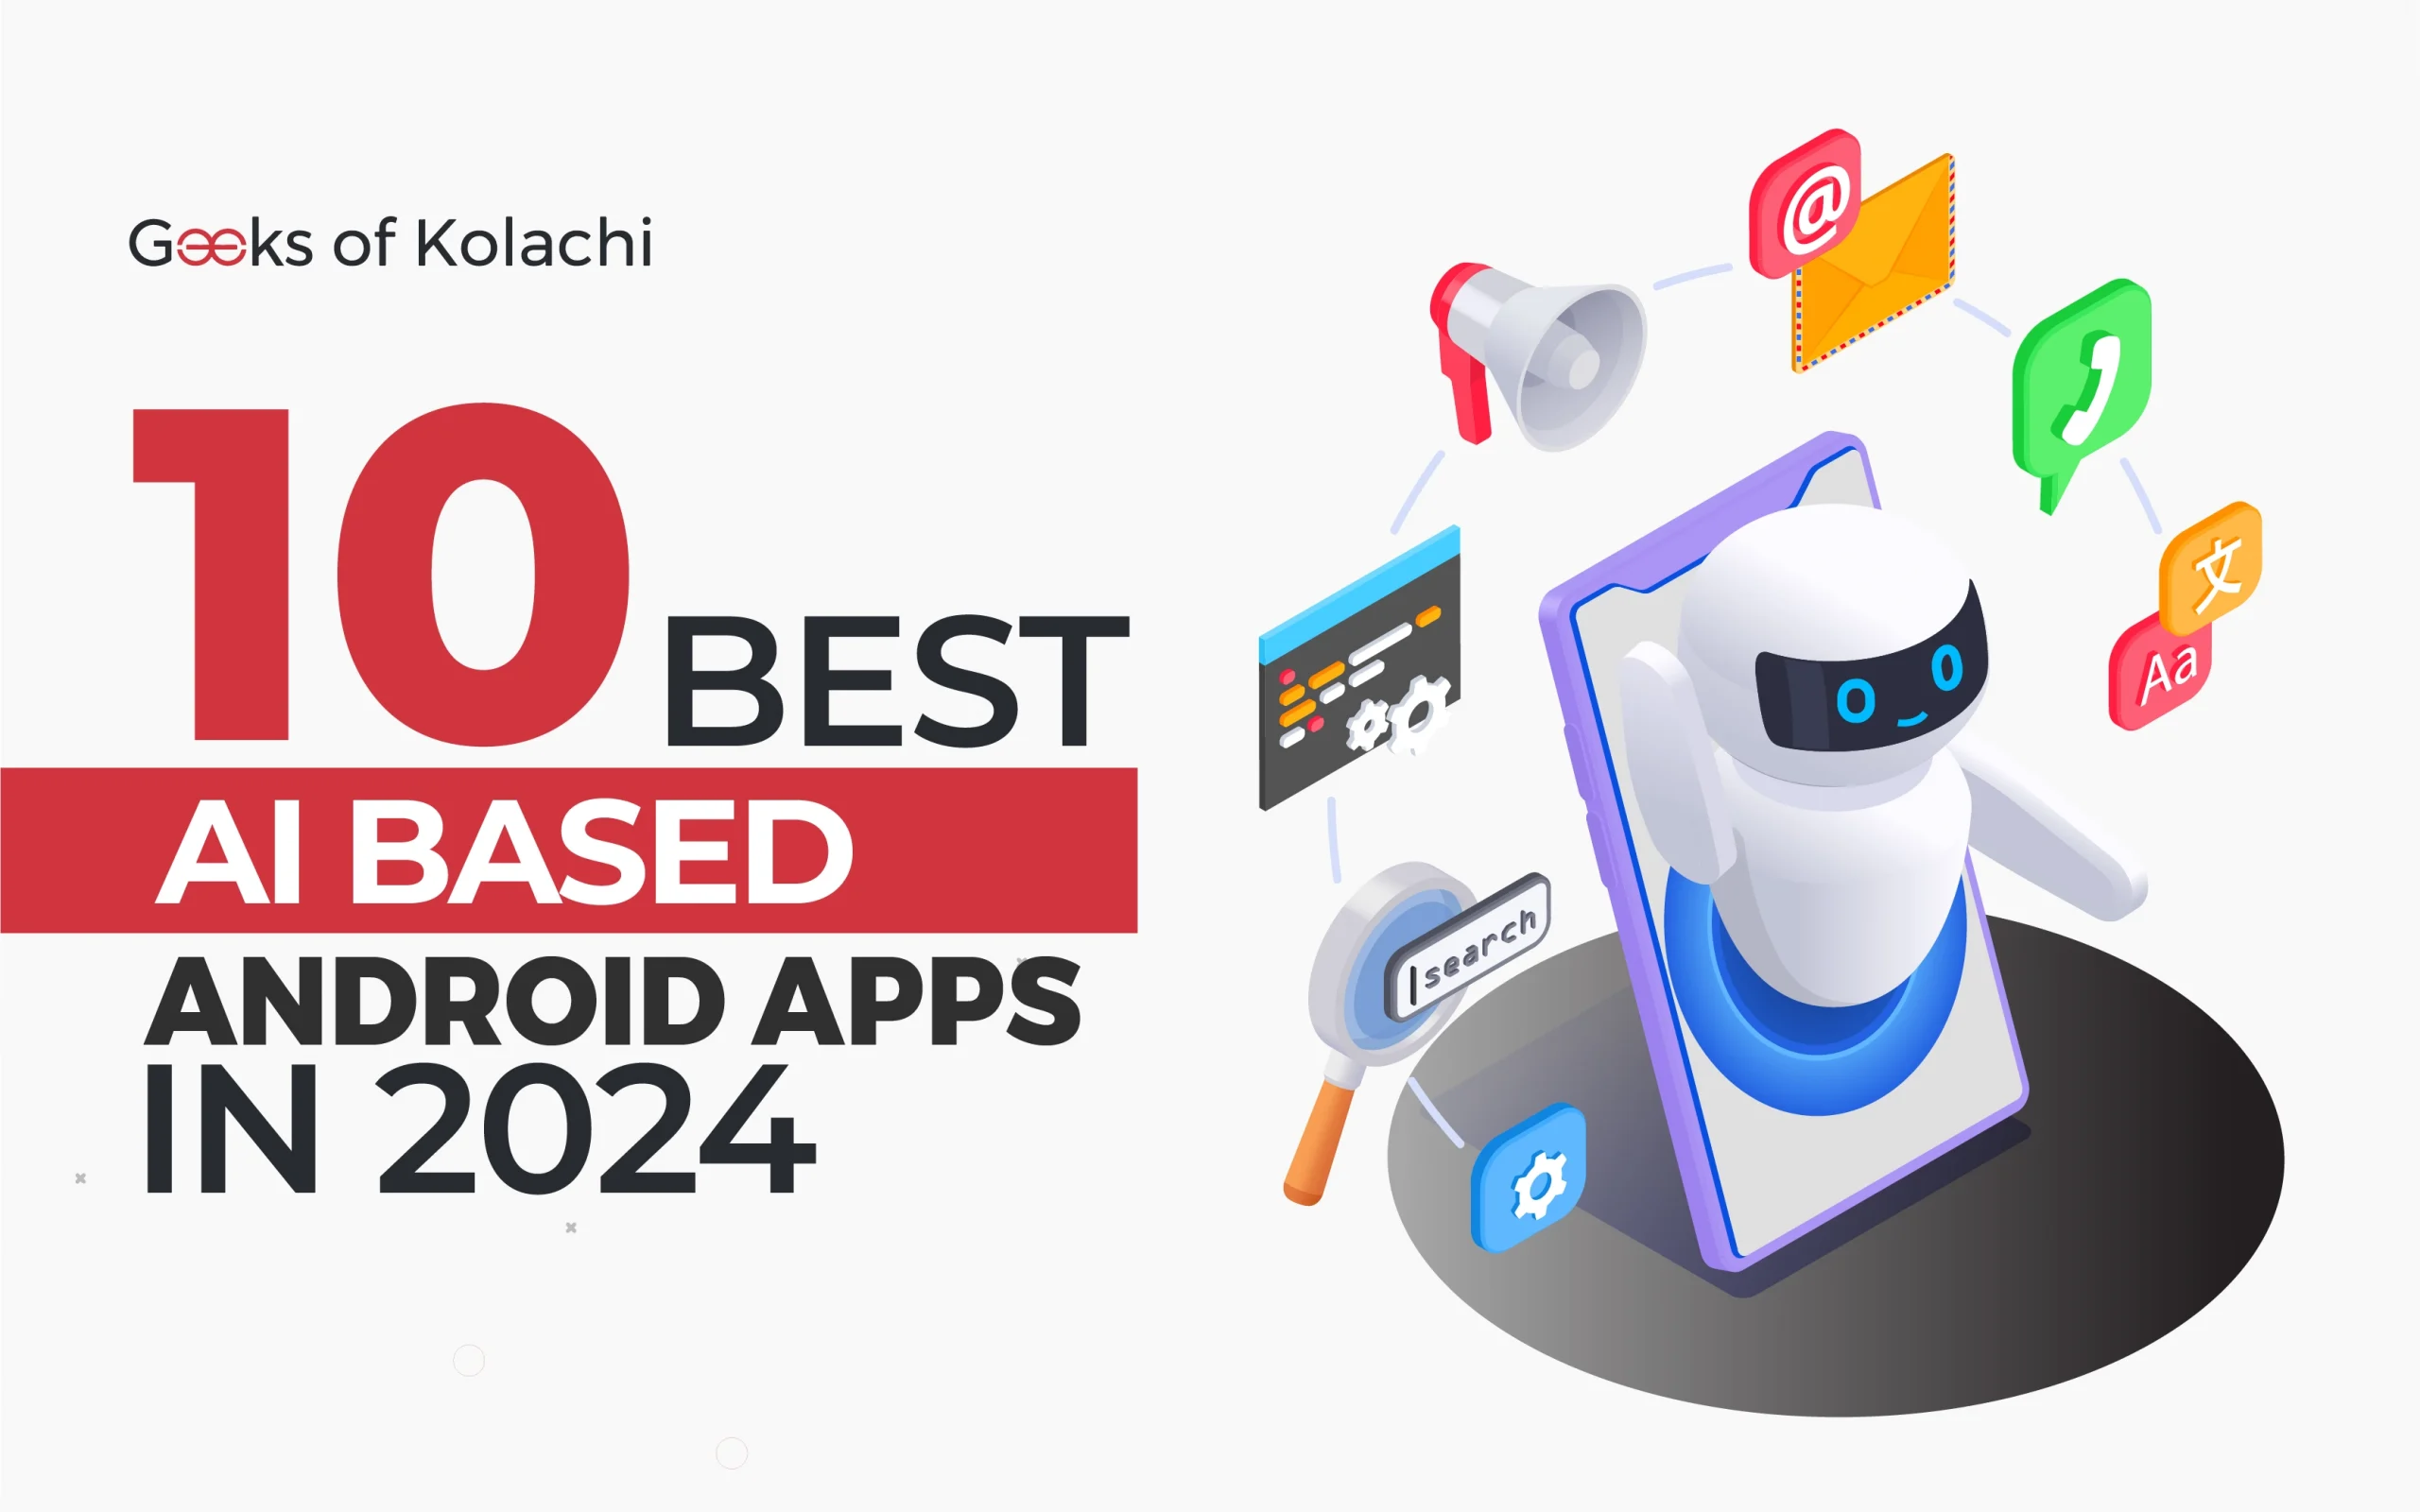 10 best AI based android apps 2024